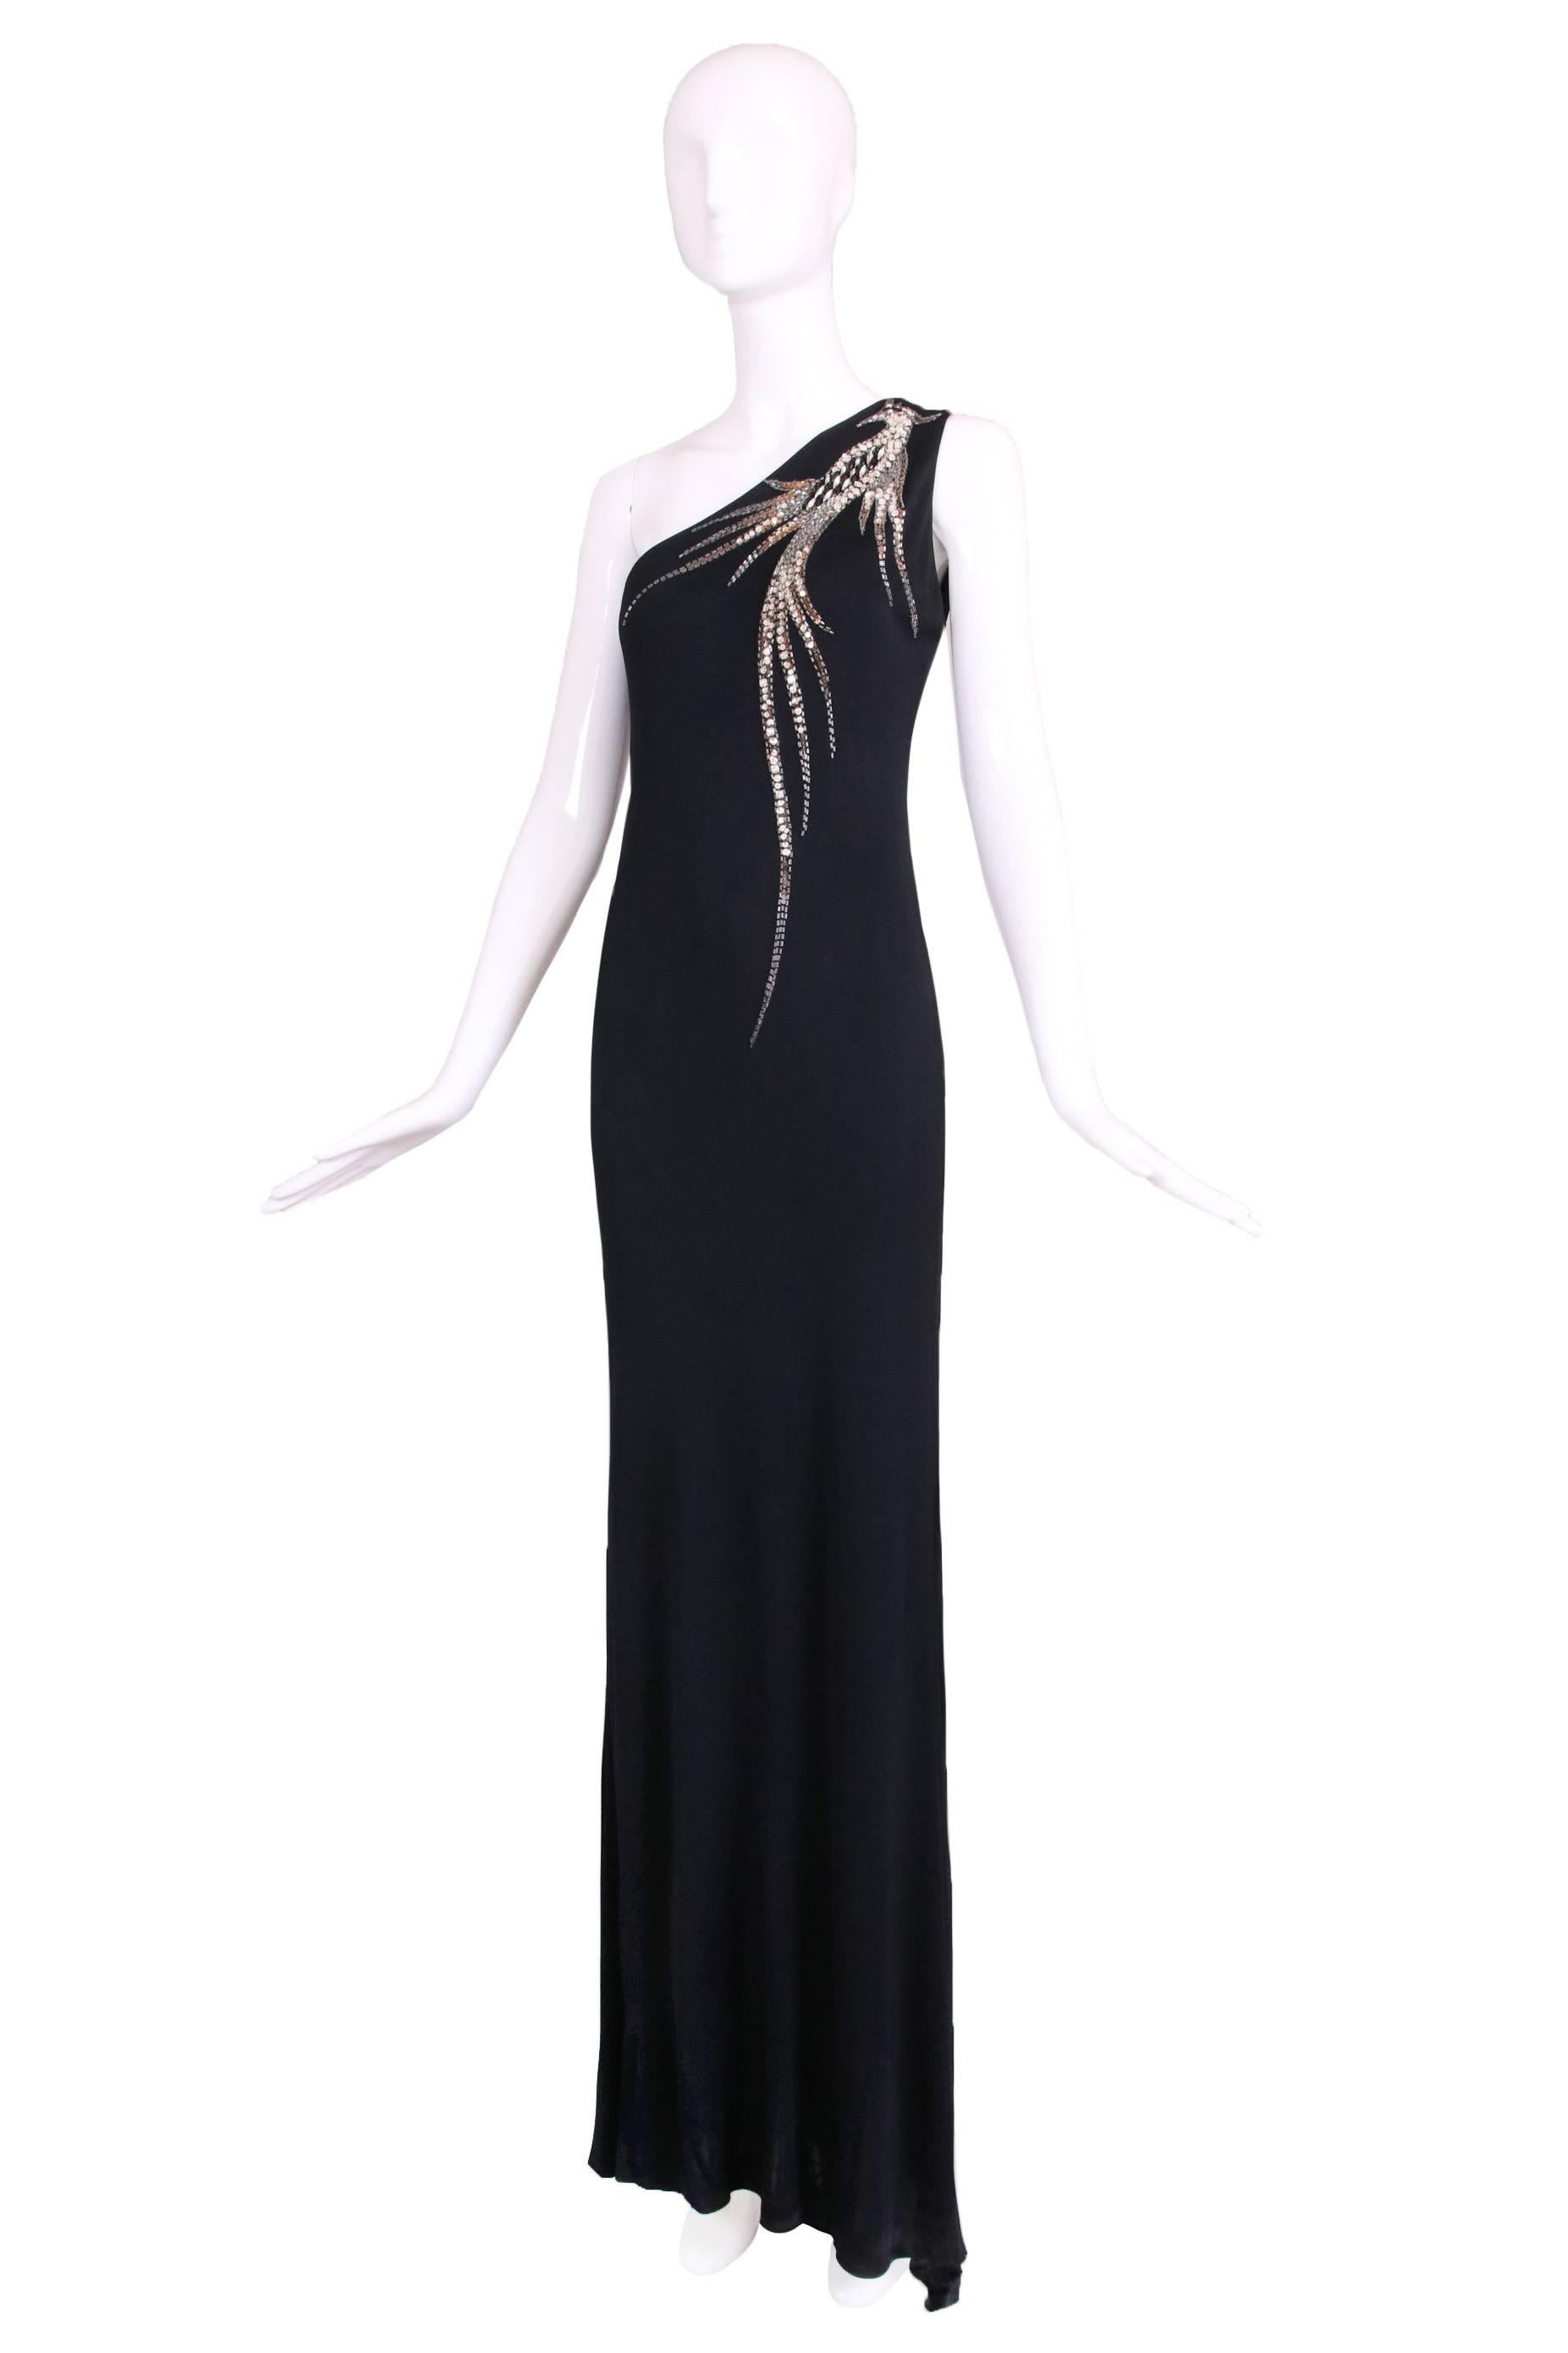 1970's Bob Mackie black silk jersey single-shoulder evening gown with beaded and sequined firebird design. In excellent condition. Please consult measurements.
MEASUREMENTS:
Bust - 35